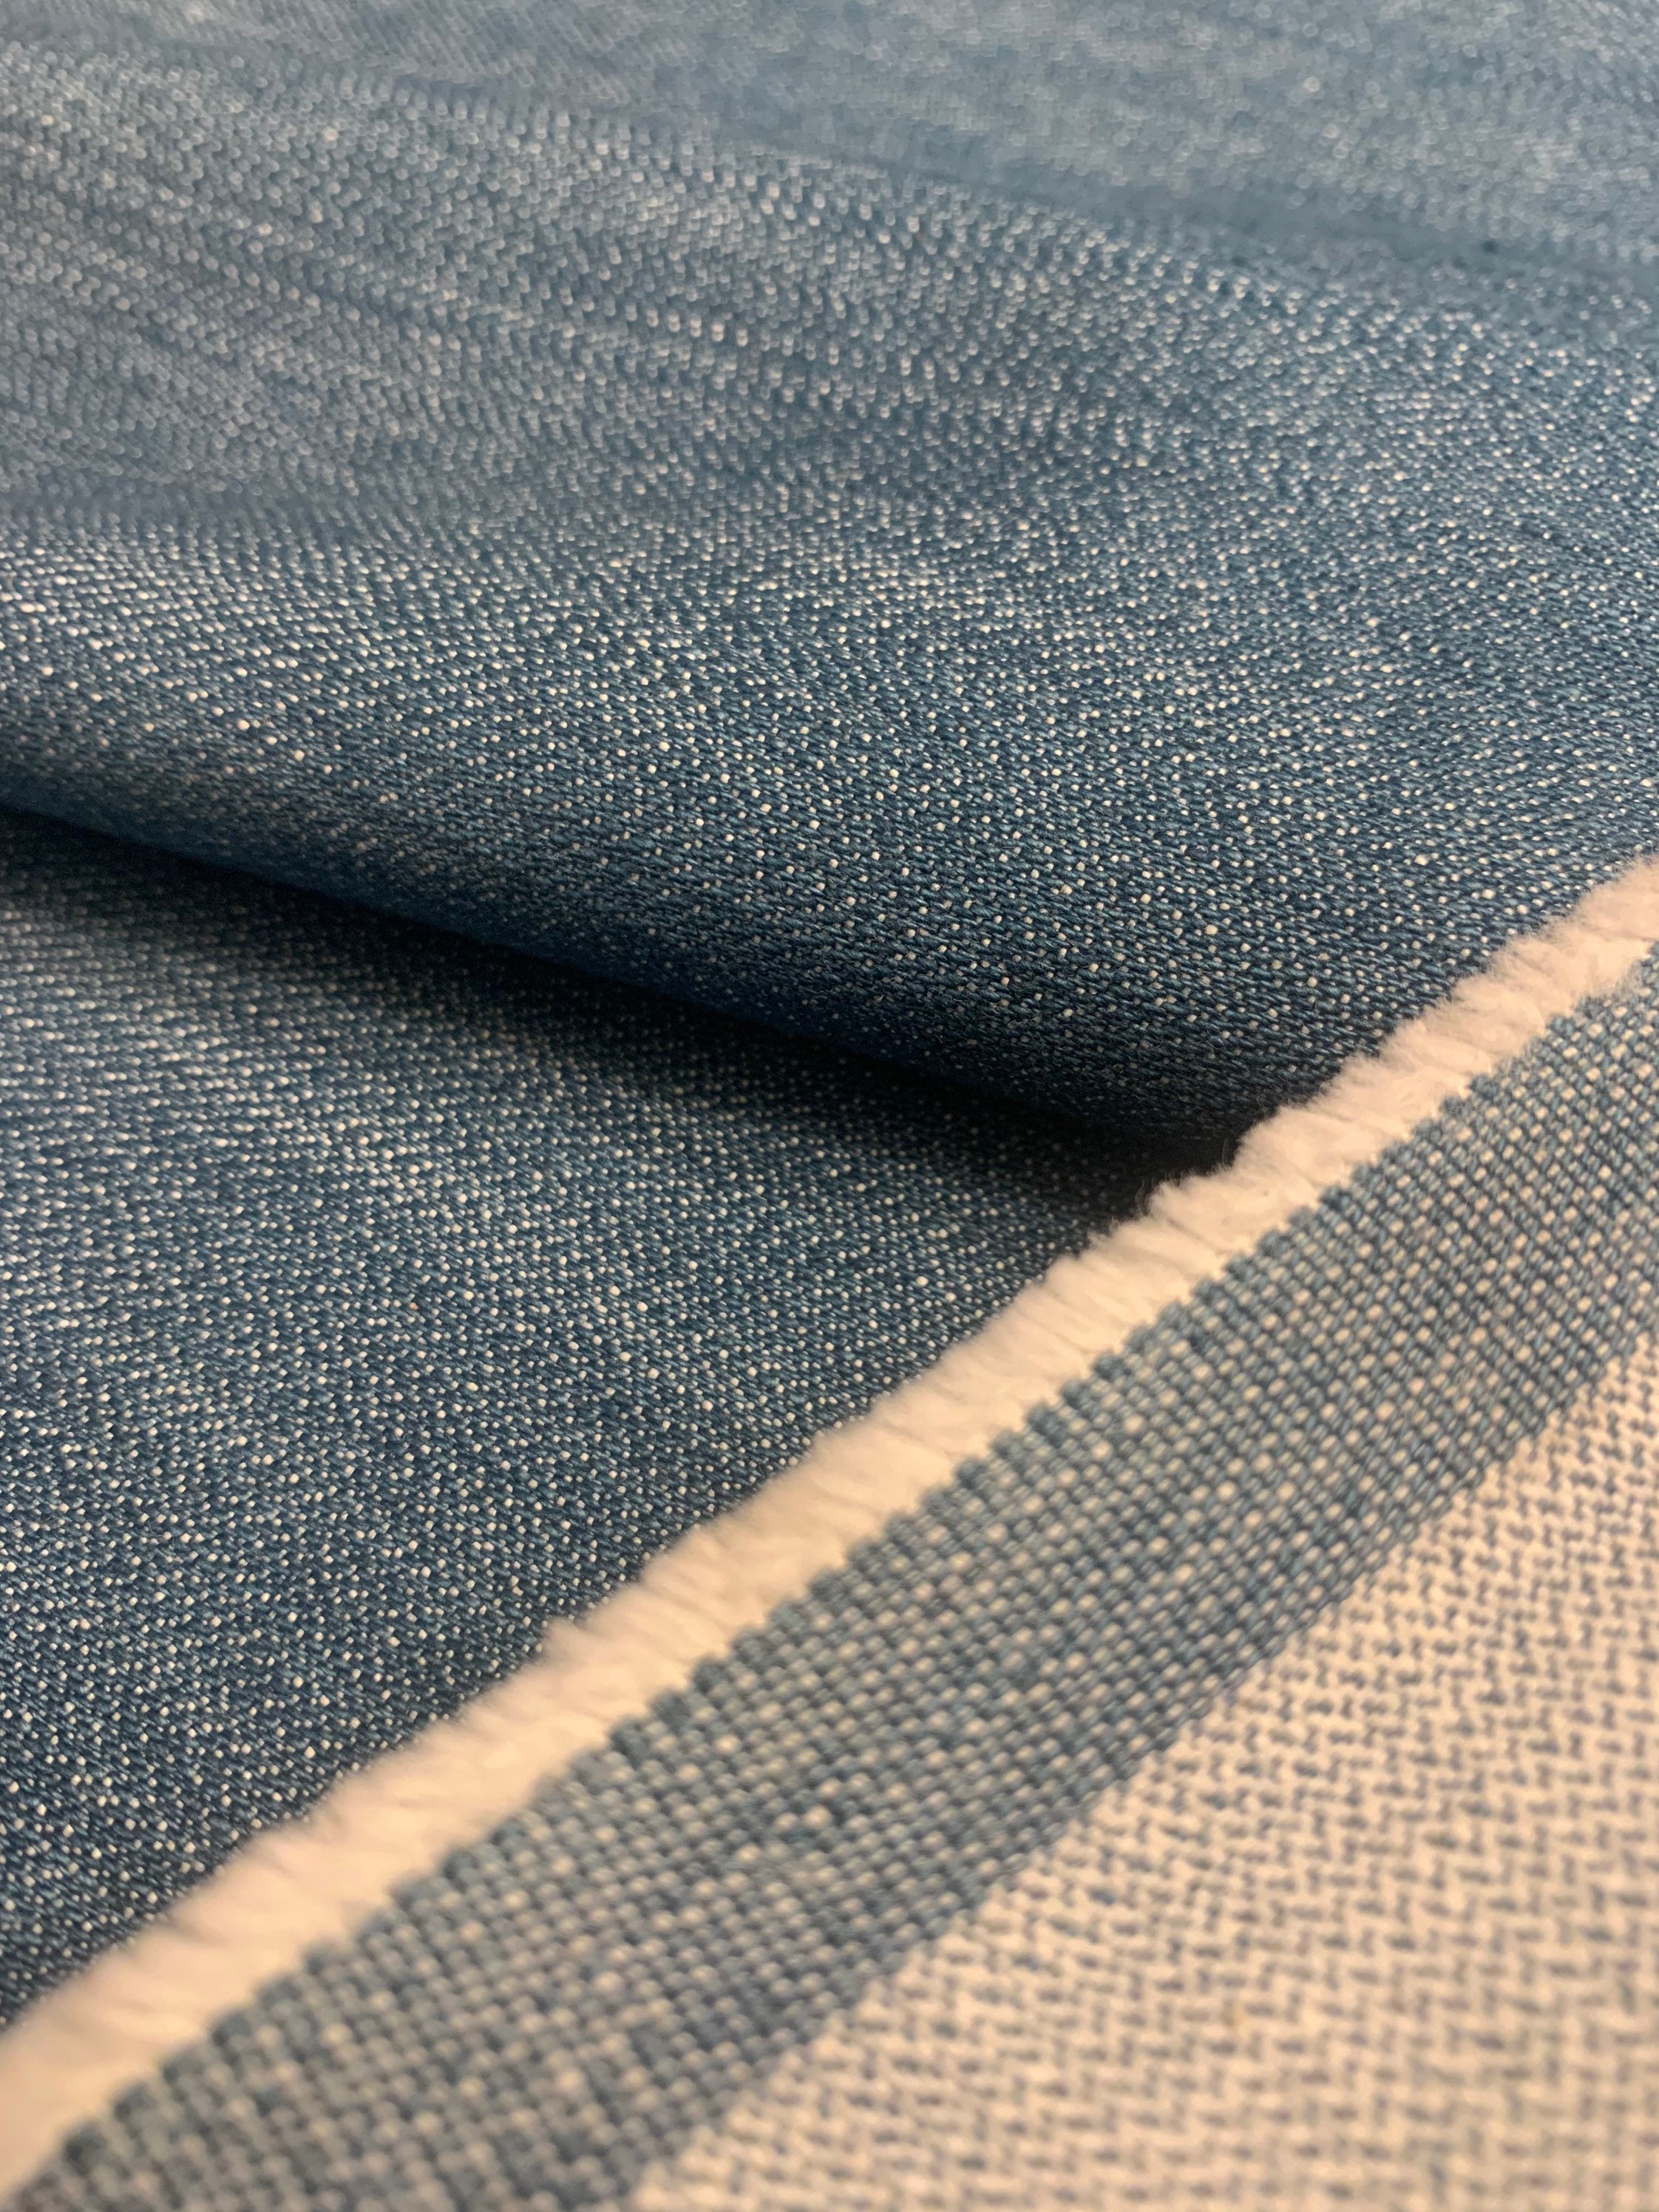 100% Cotton Blue Jeans Fabric Lightweight Denim Fabric By The Yard 6 Oz 203  Gsm